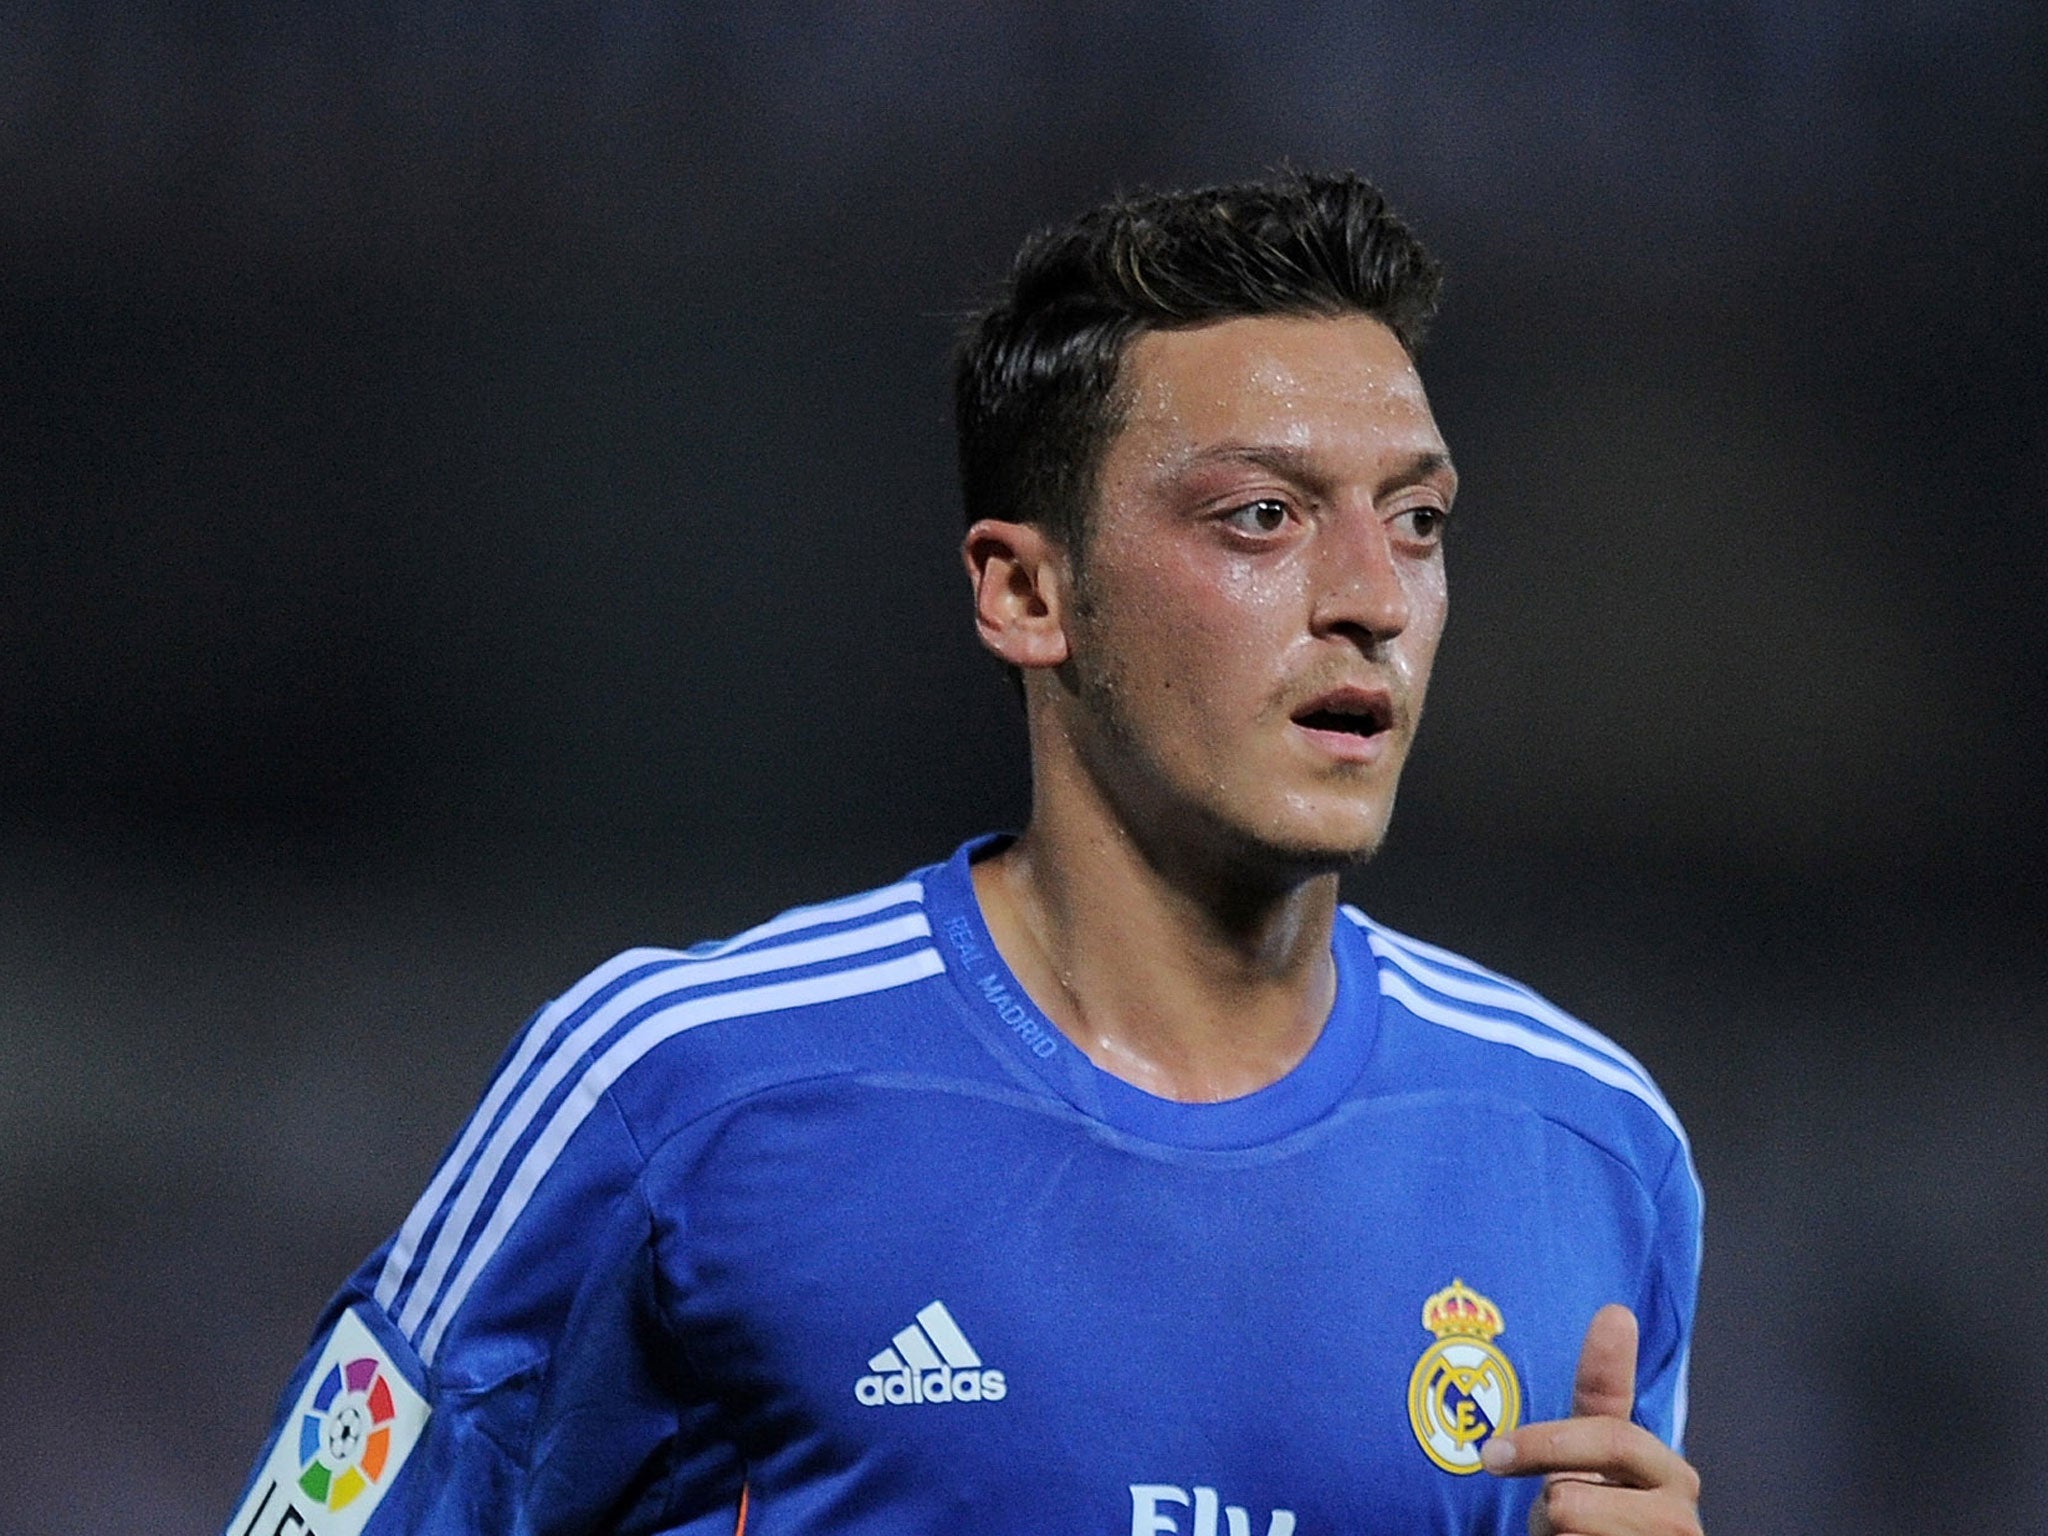 Mesut Ozil says he has no intention of leaving Real Madrid